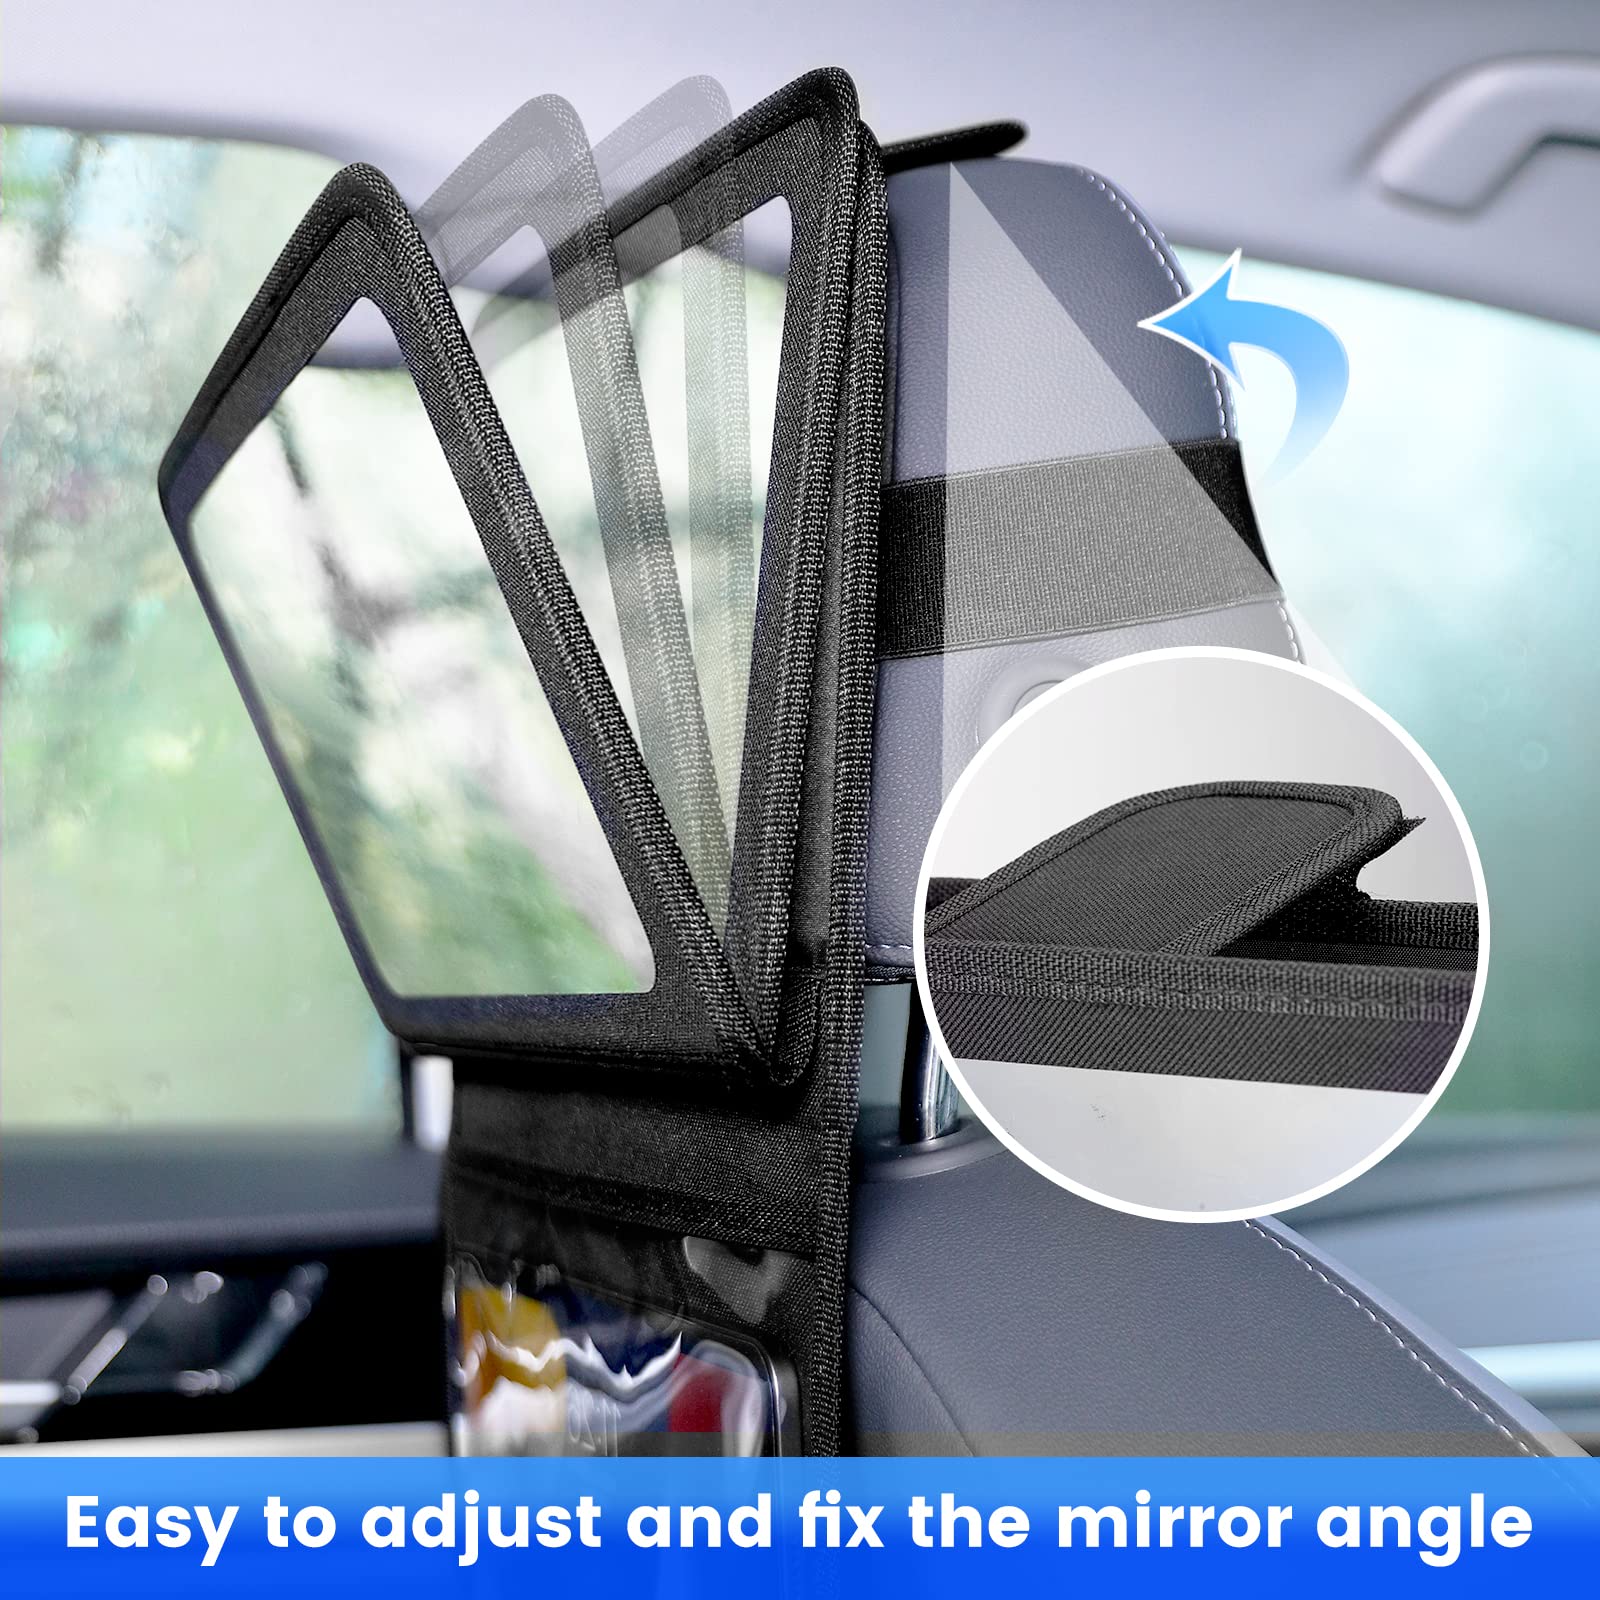 Baby Car Mirror with Touchable Tablet Holder, Adjustable Backseat Mirror for Rear Facing Infant Newborn with Wide and Bright View, Fully Assembled, Stable and Shatterproof for Toddler, Kids